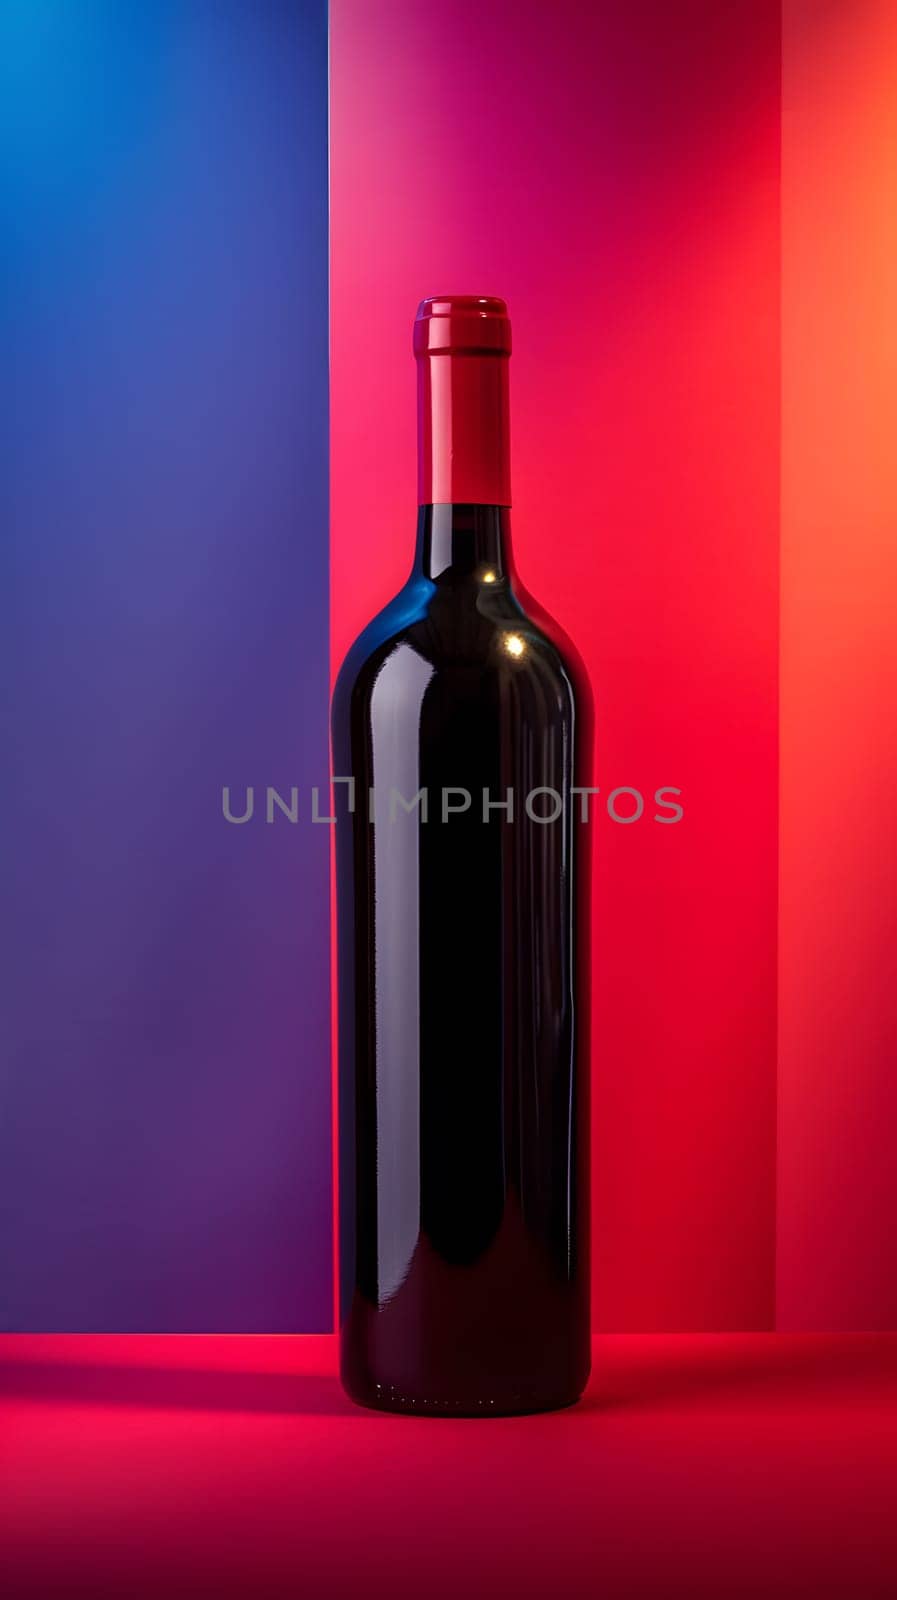 A glass bottle of red wine is resting on a vibrant table, showcasing its rich fluid content. The bottles cylindrical shape adds elegance to the barware